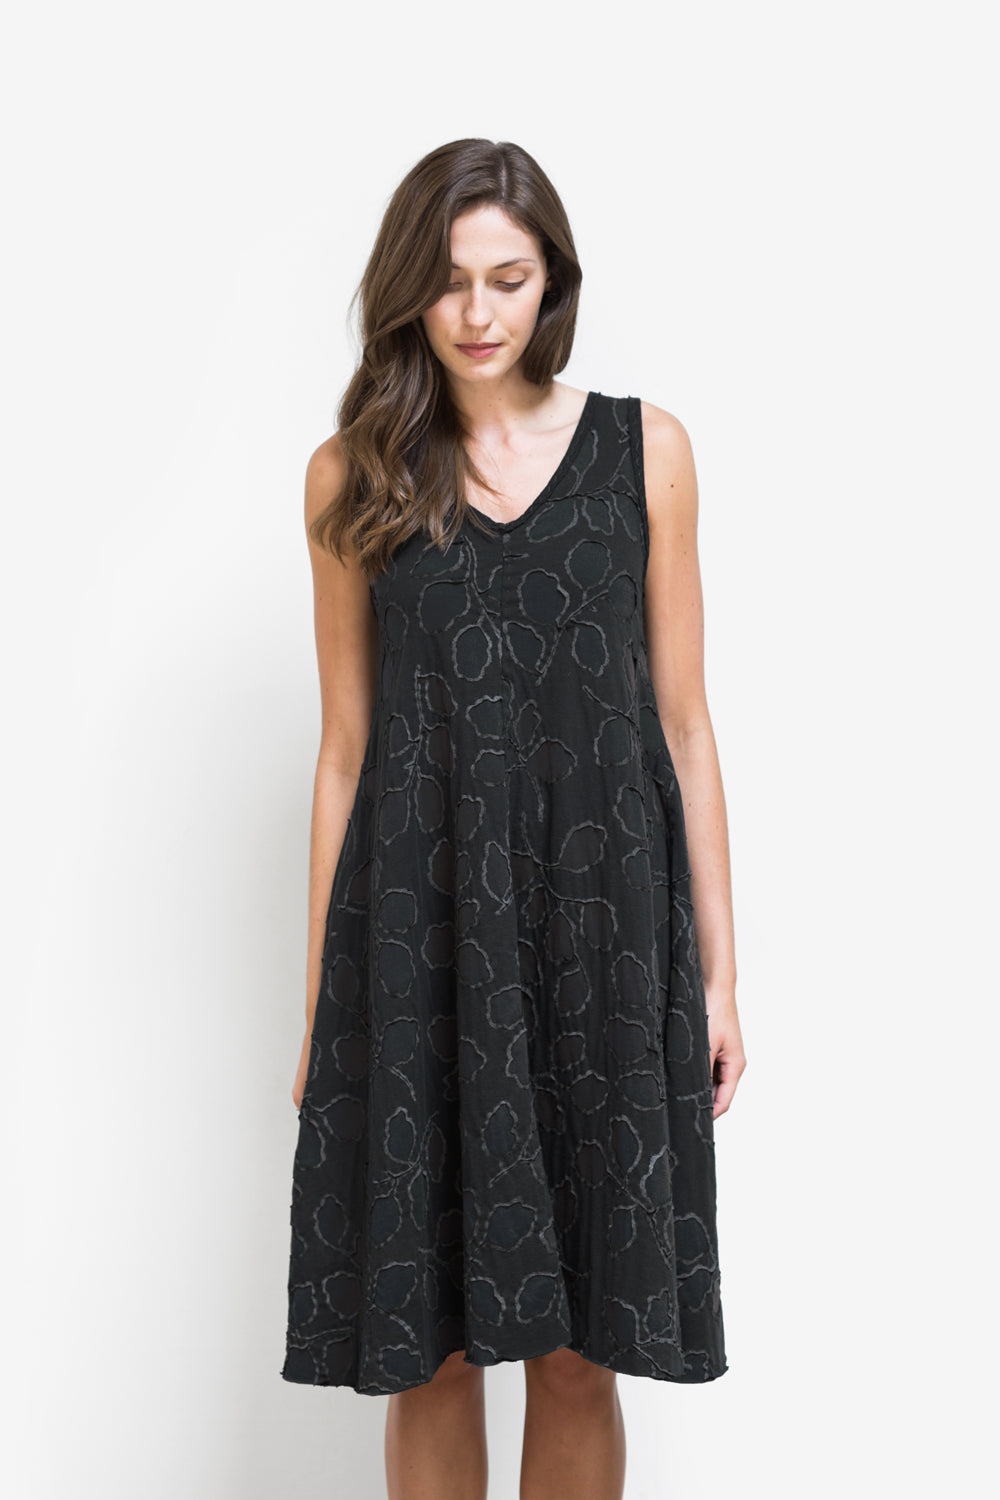 The A-Line Dress in black with New Leaves design on model.